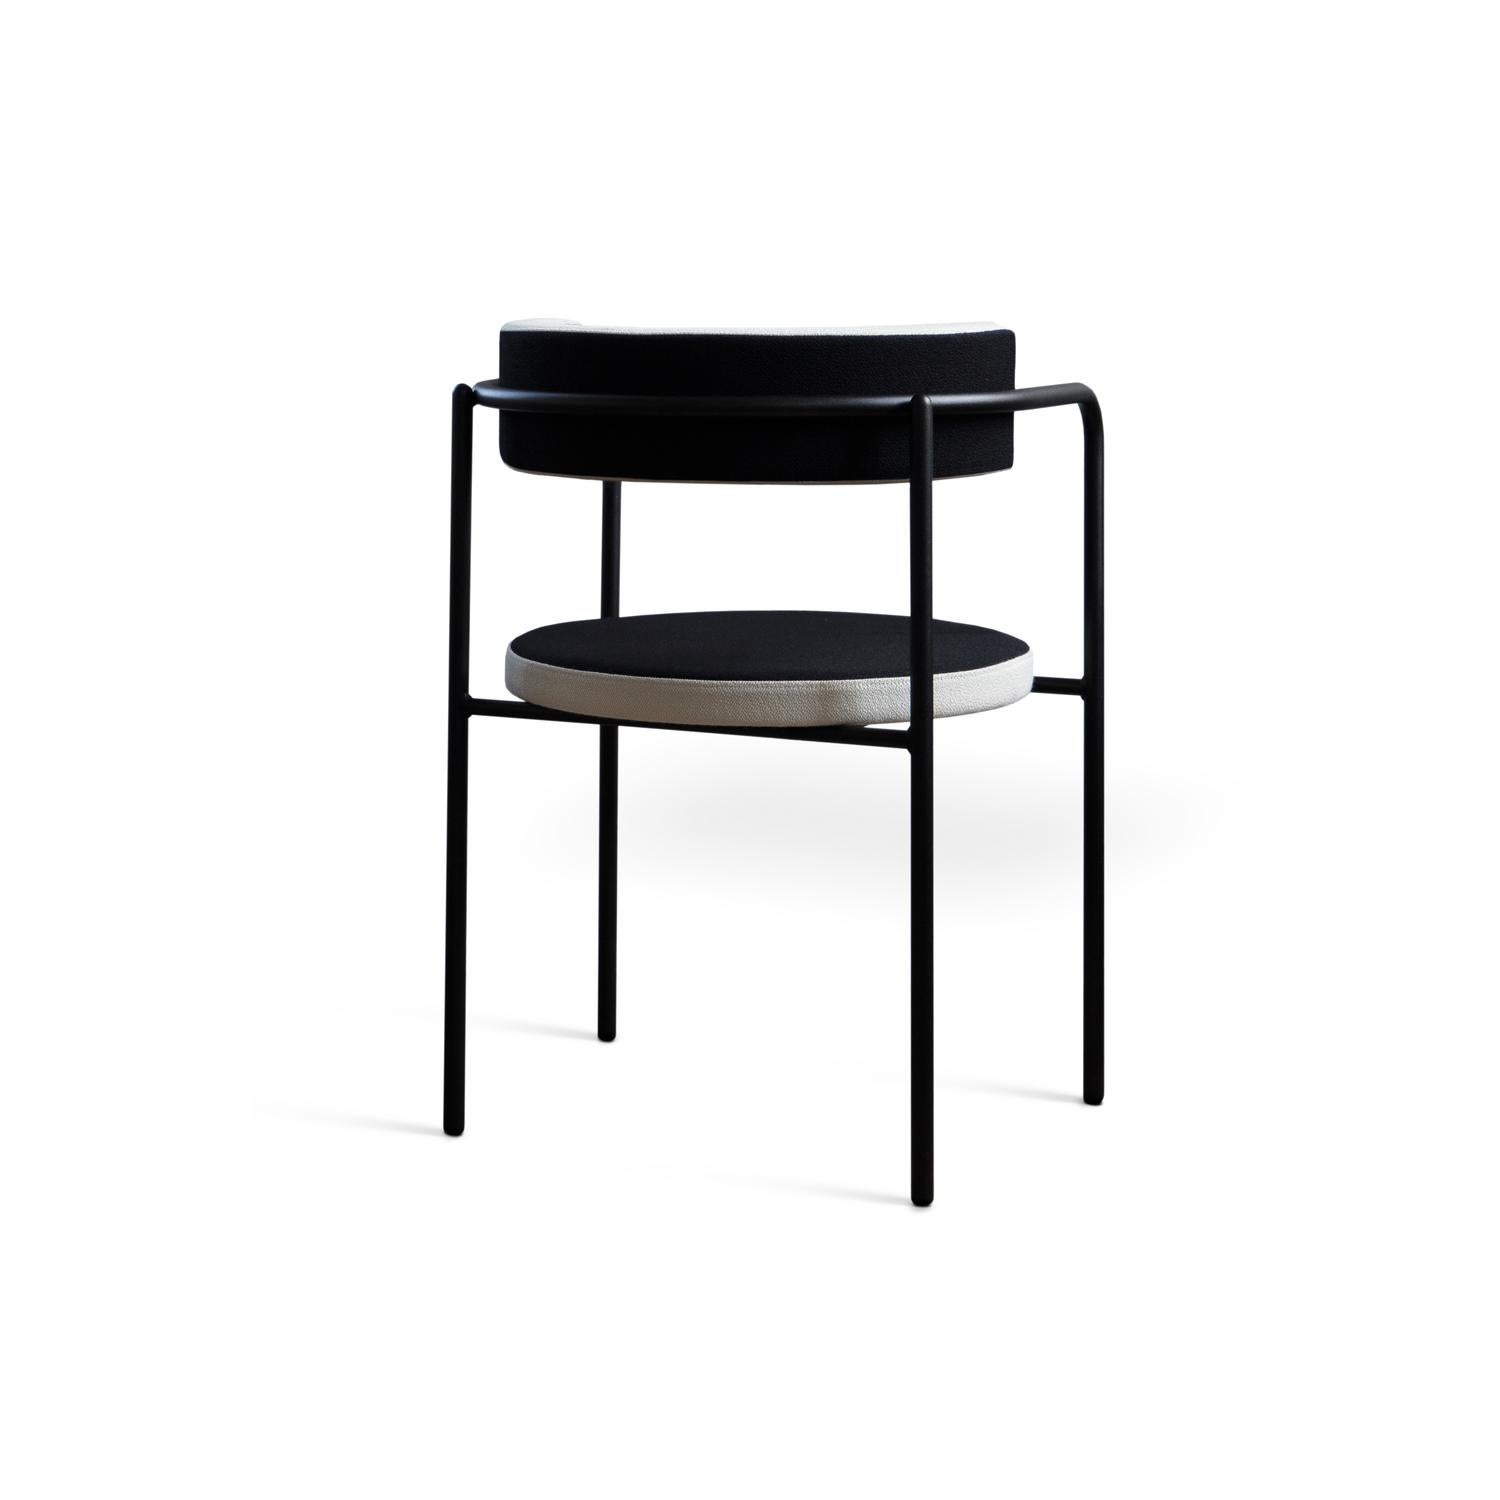 Danish Contemporary Chair 'FF 4-Legs', Vidar Fabric, Black 1880 and White 1880 For Sale